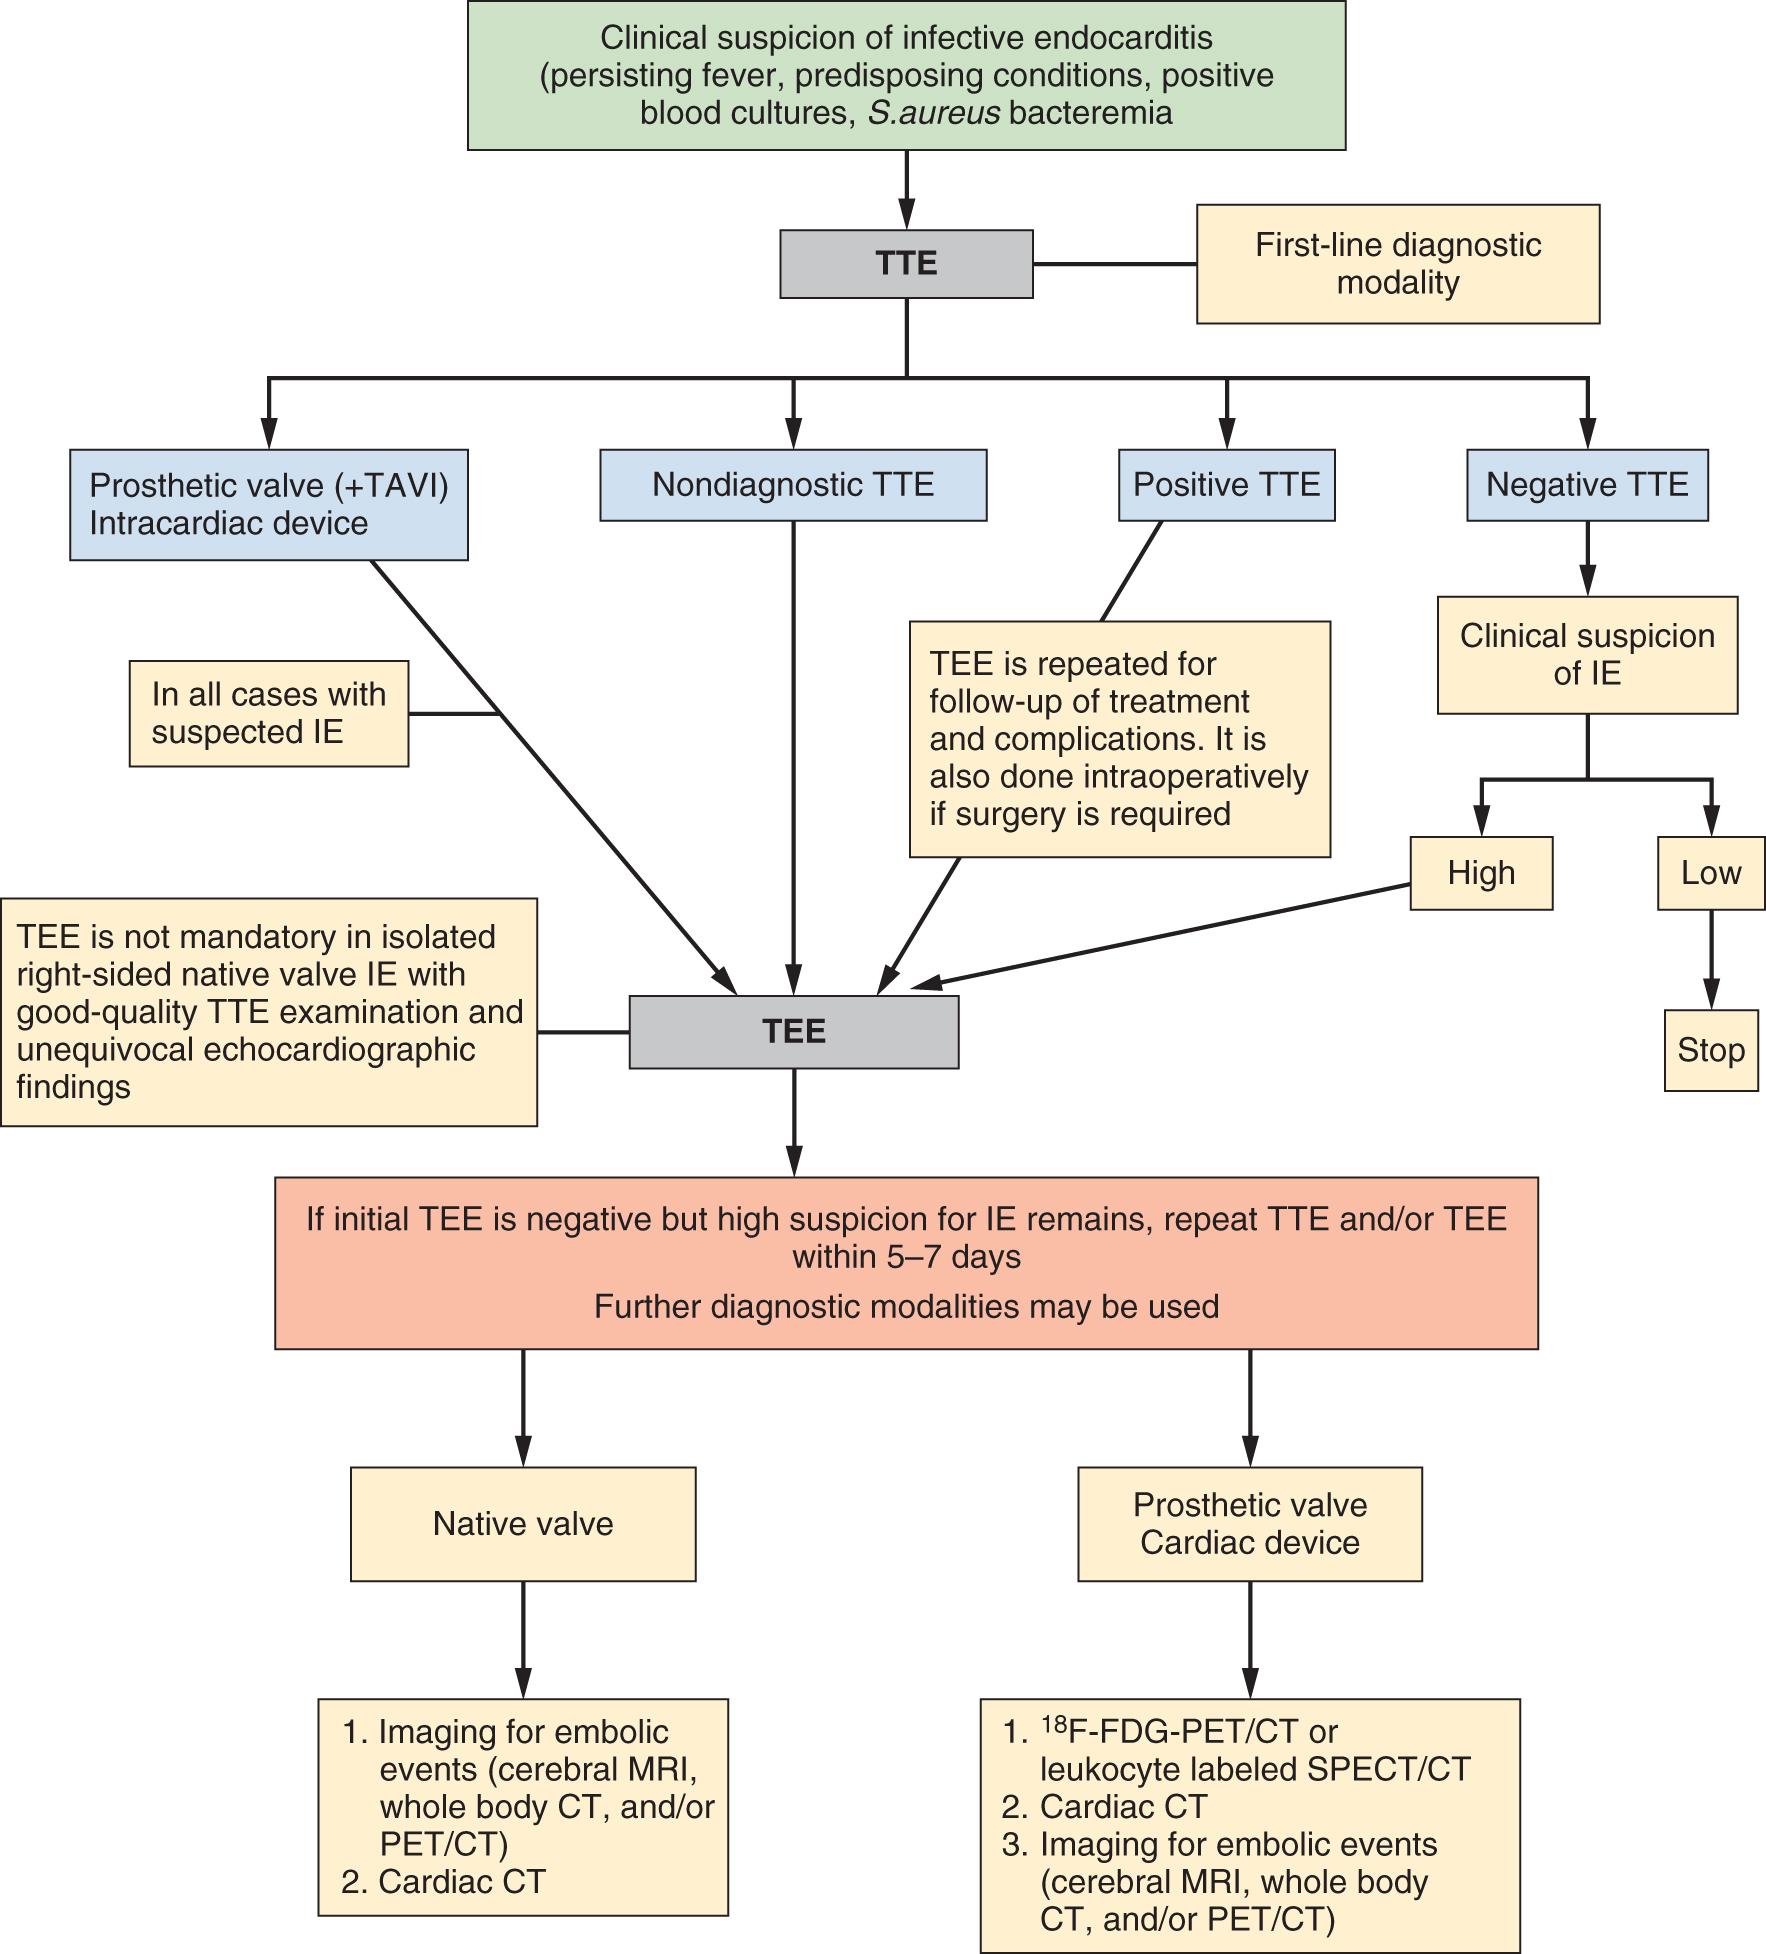 Fig. 117.1, Algorithm of Diagnostic Imaging Modalities in Suspected Infective Endocarditis.